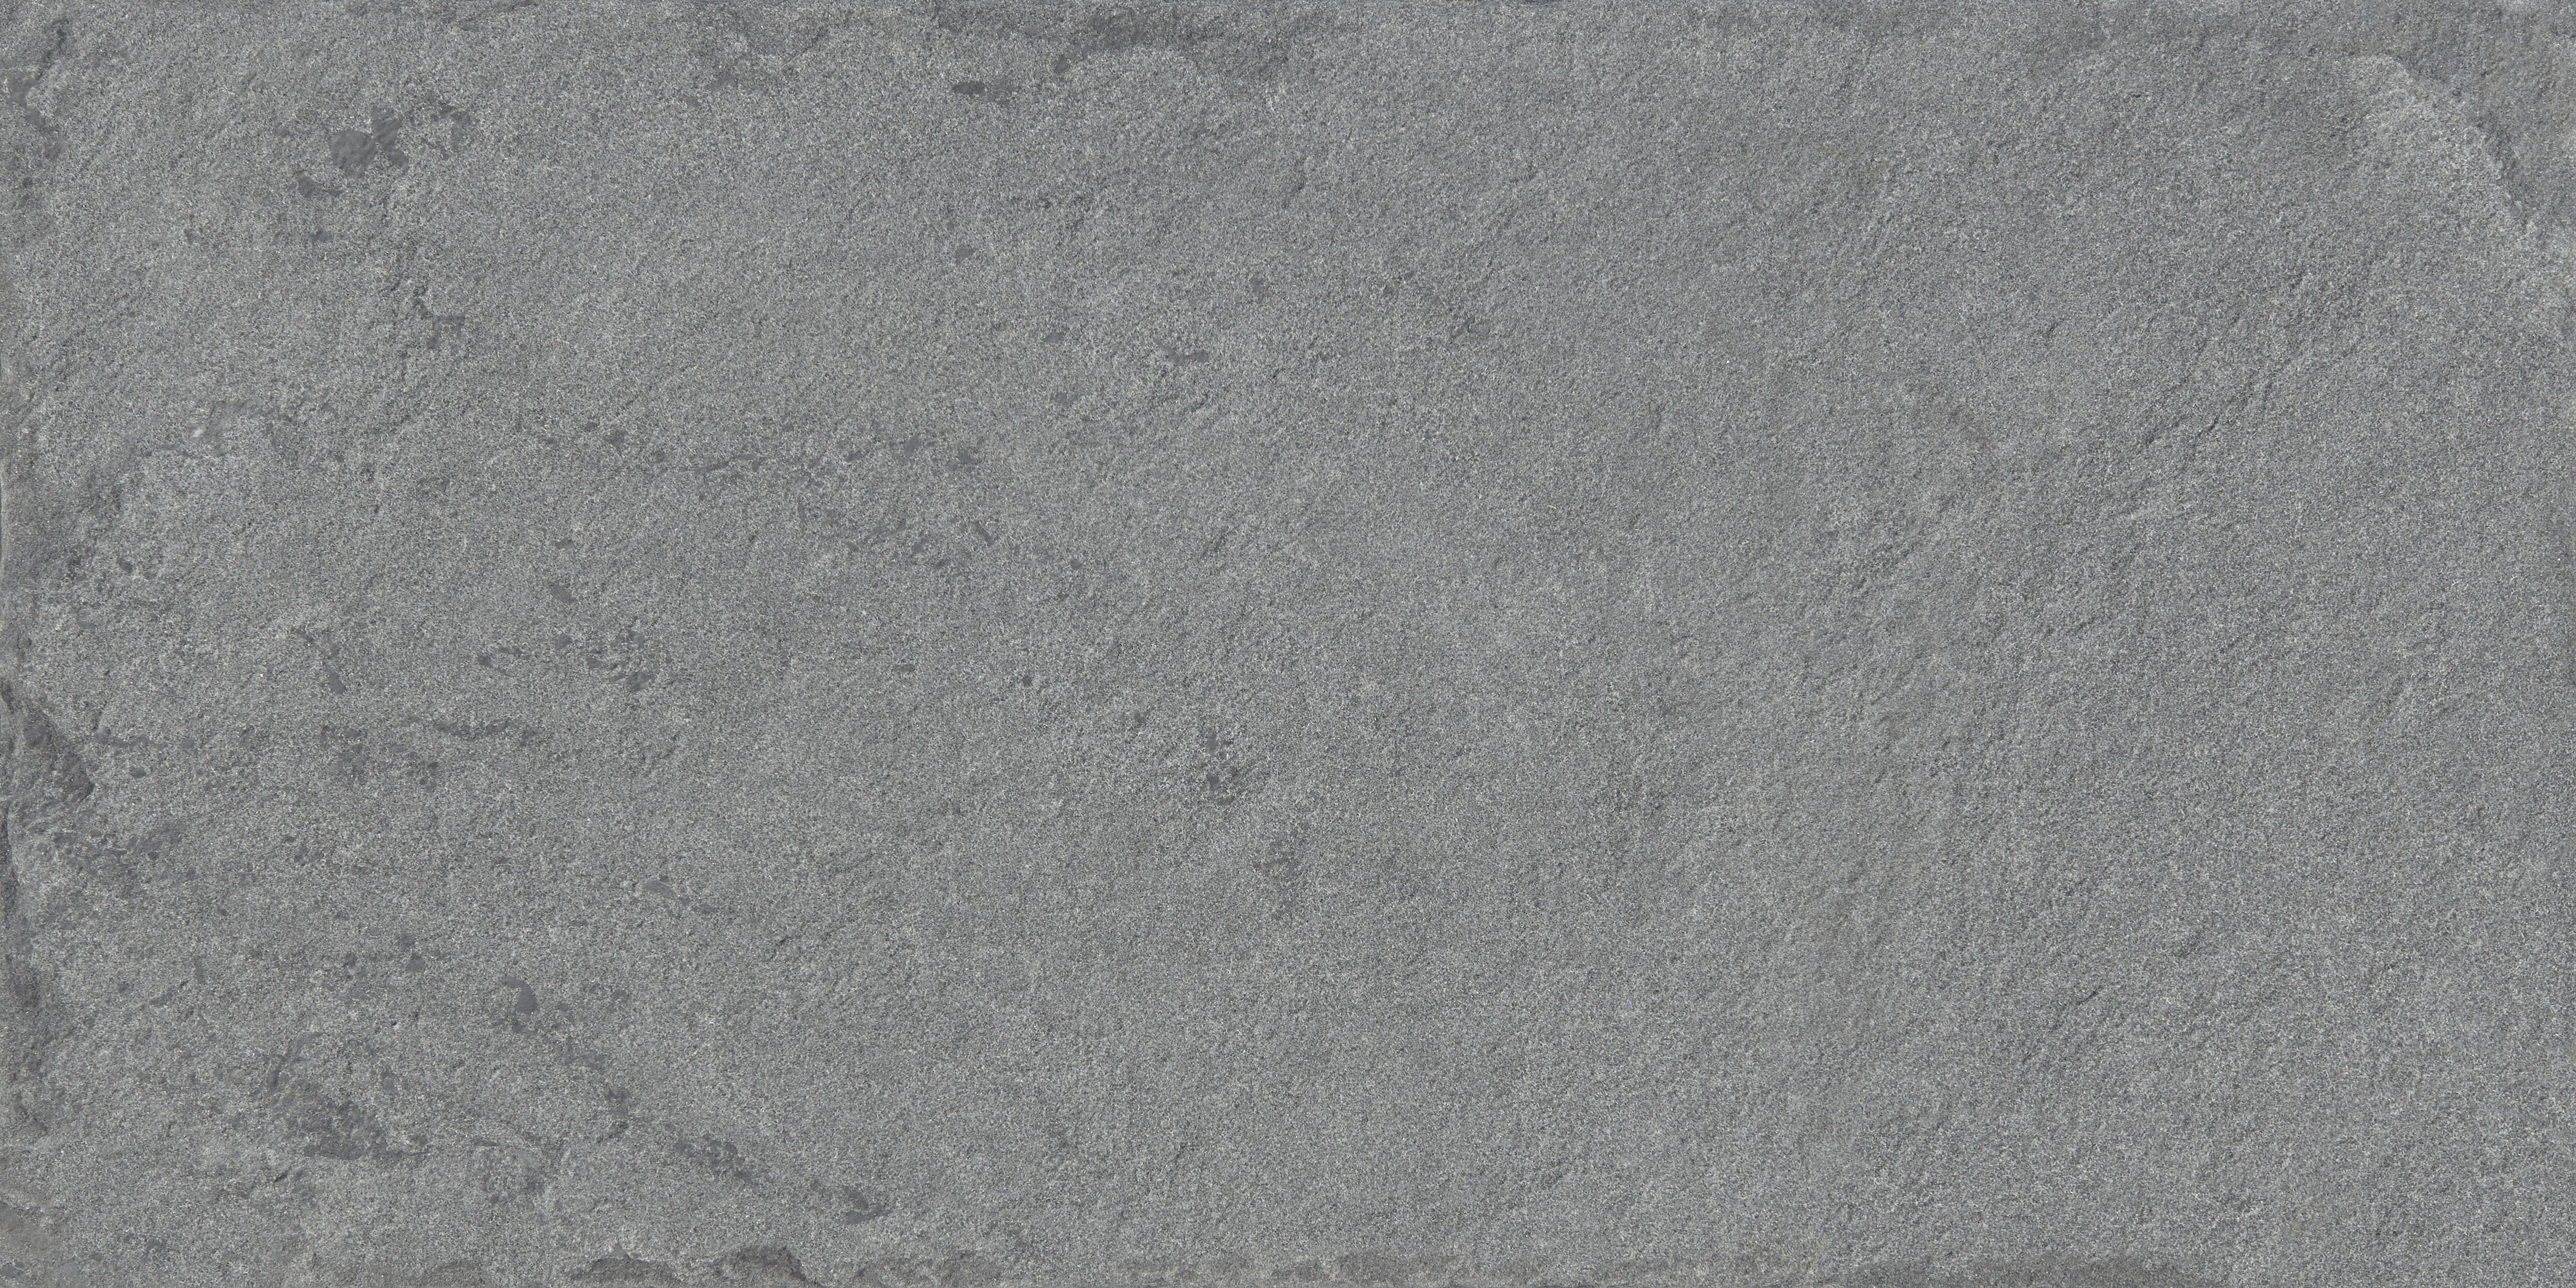 landmark frontier20 bluestone tumbled tumbled paver tile 8_875x17_6875x20mm matte pressed porcelain tile distributed by surface group international